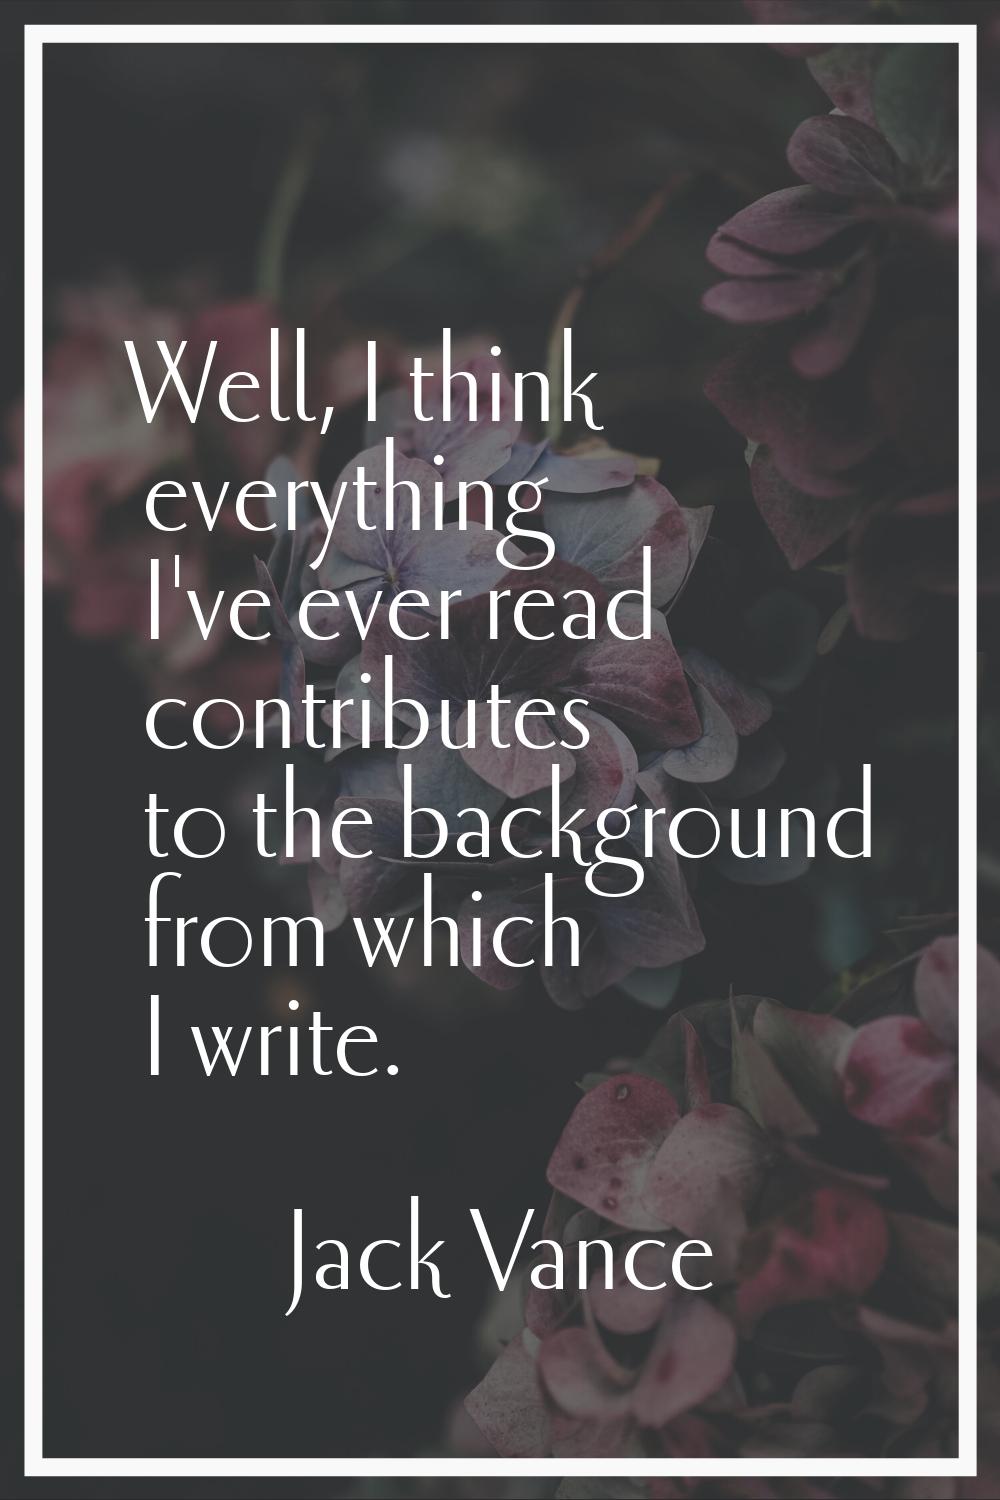 Well, I think everything I've ever read contributes to the background from which I write.